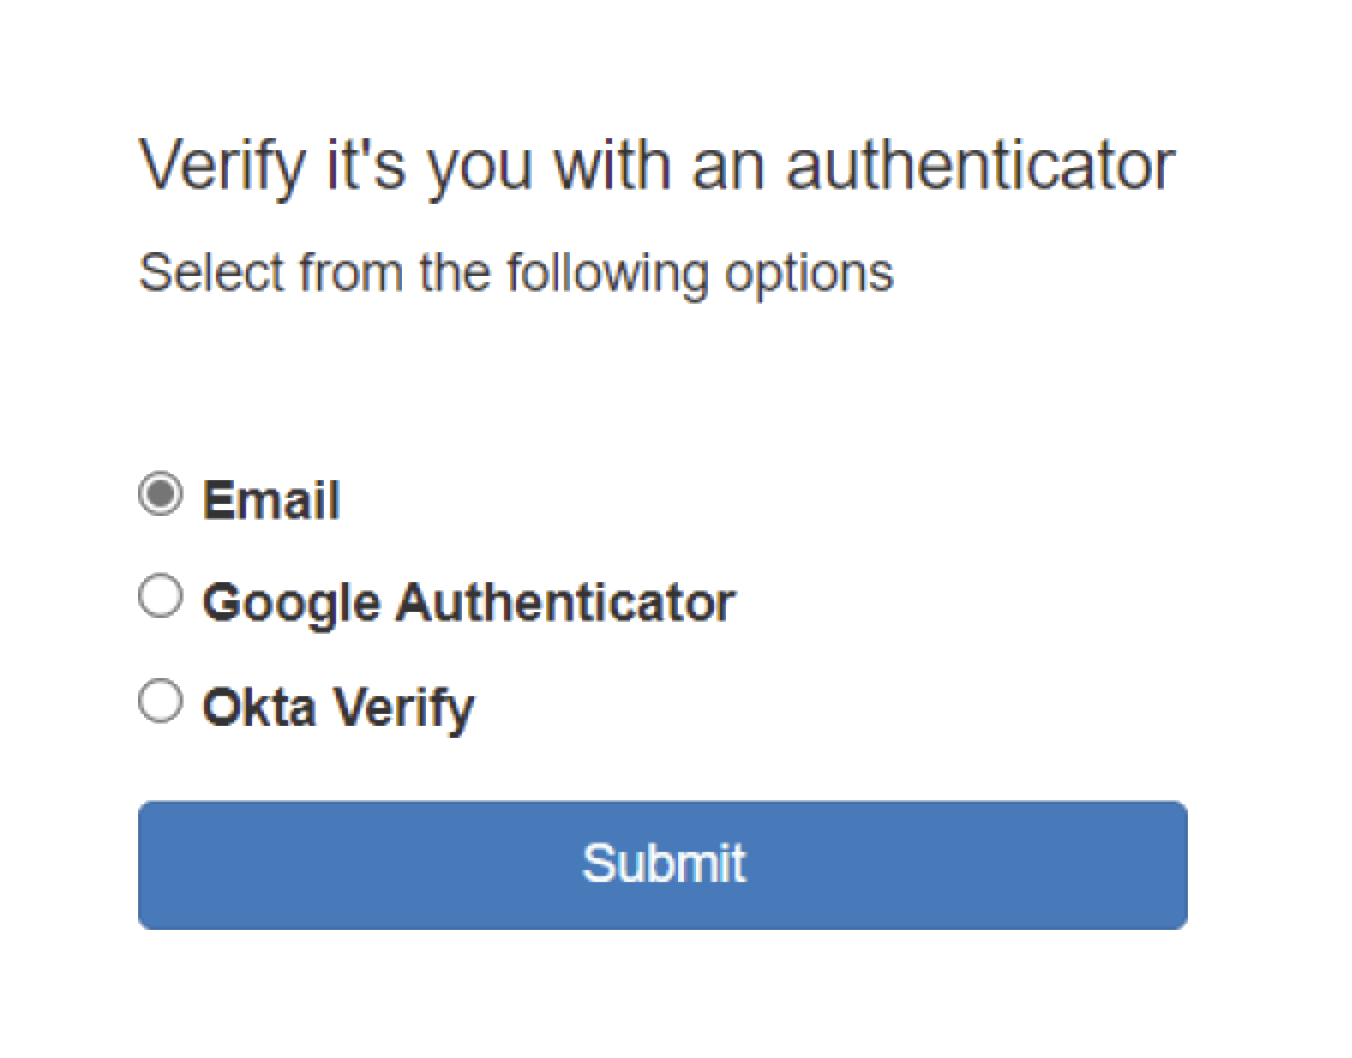 A list of enrolled authenticators for the user to choose from